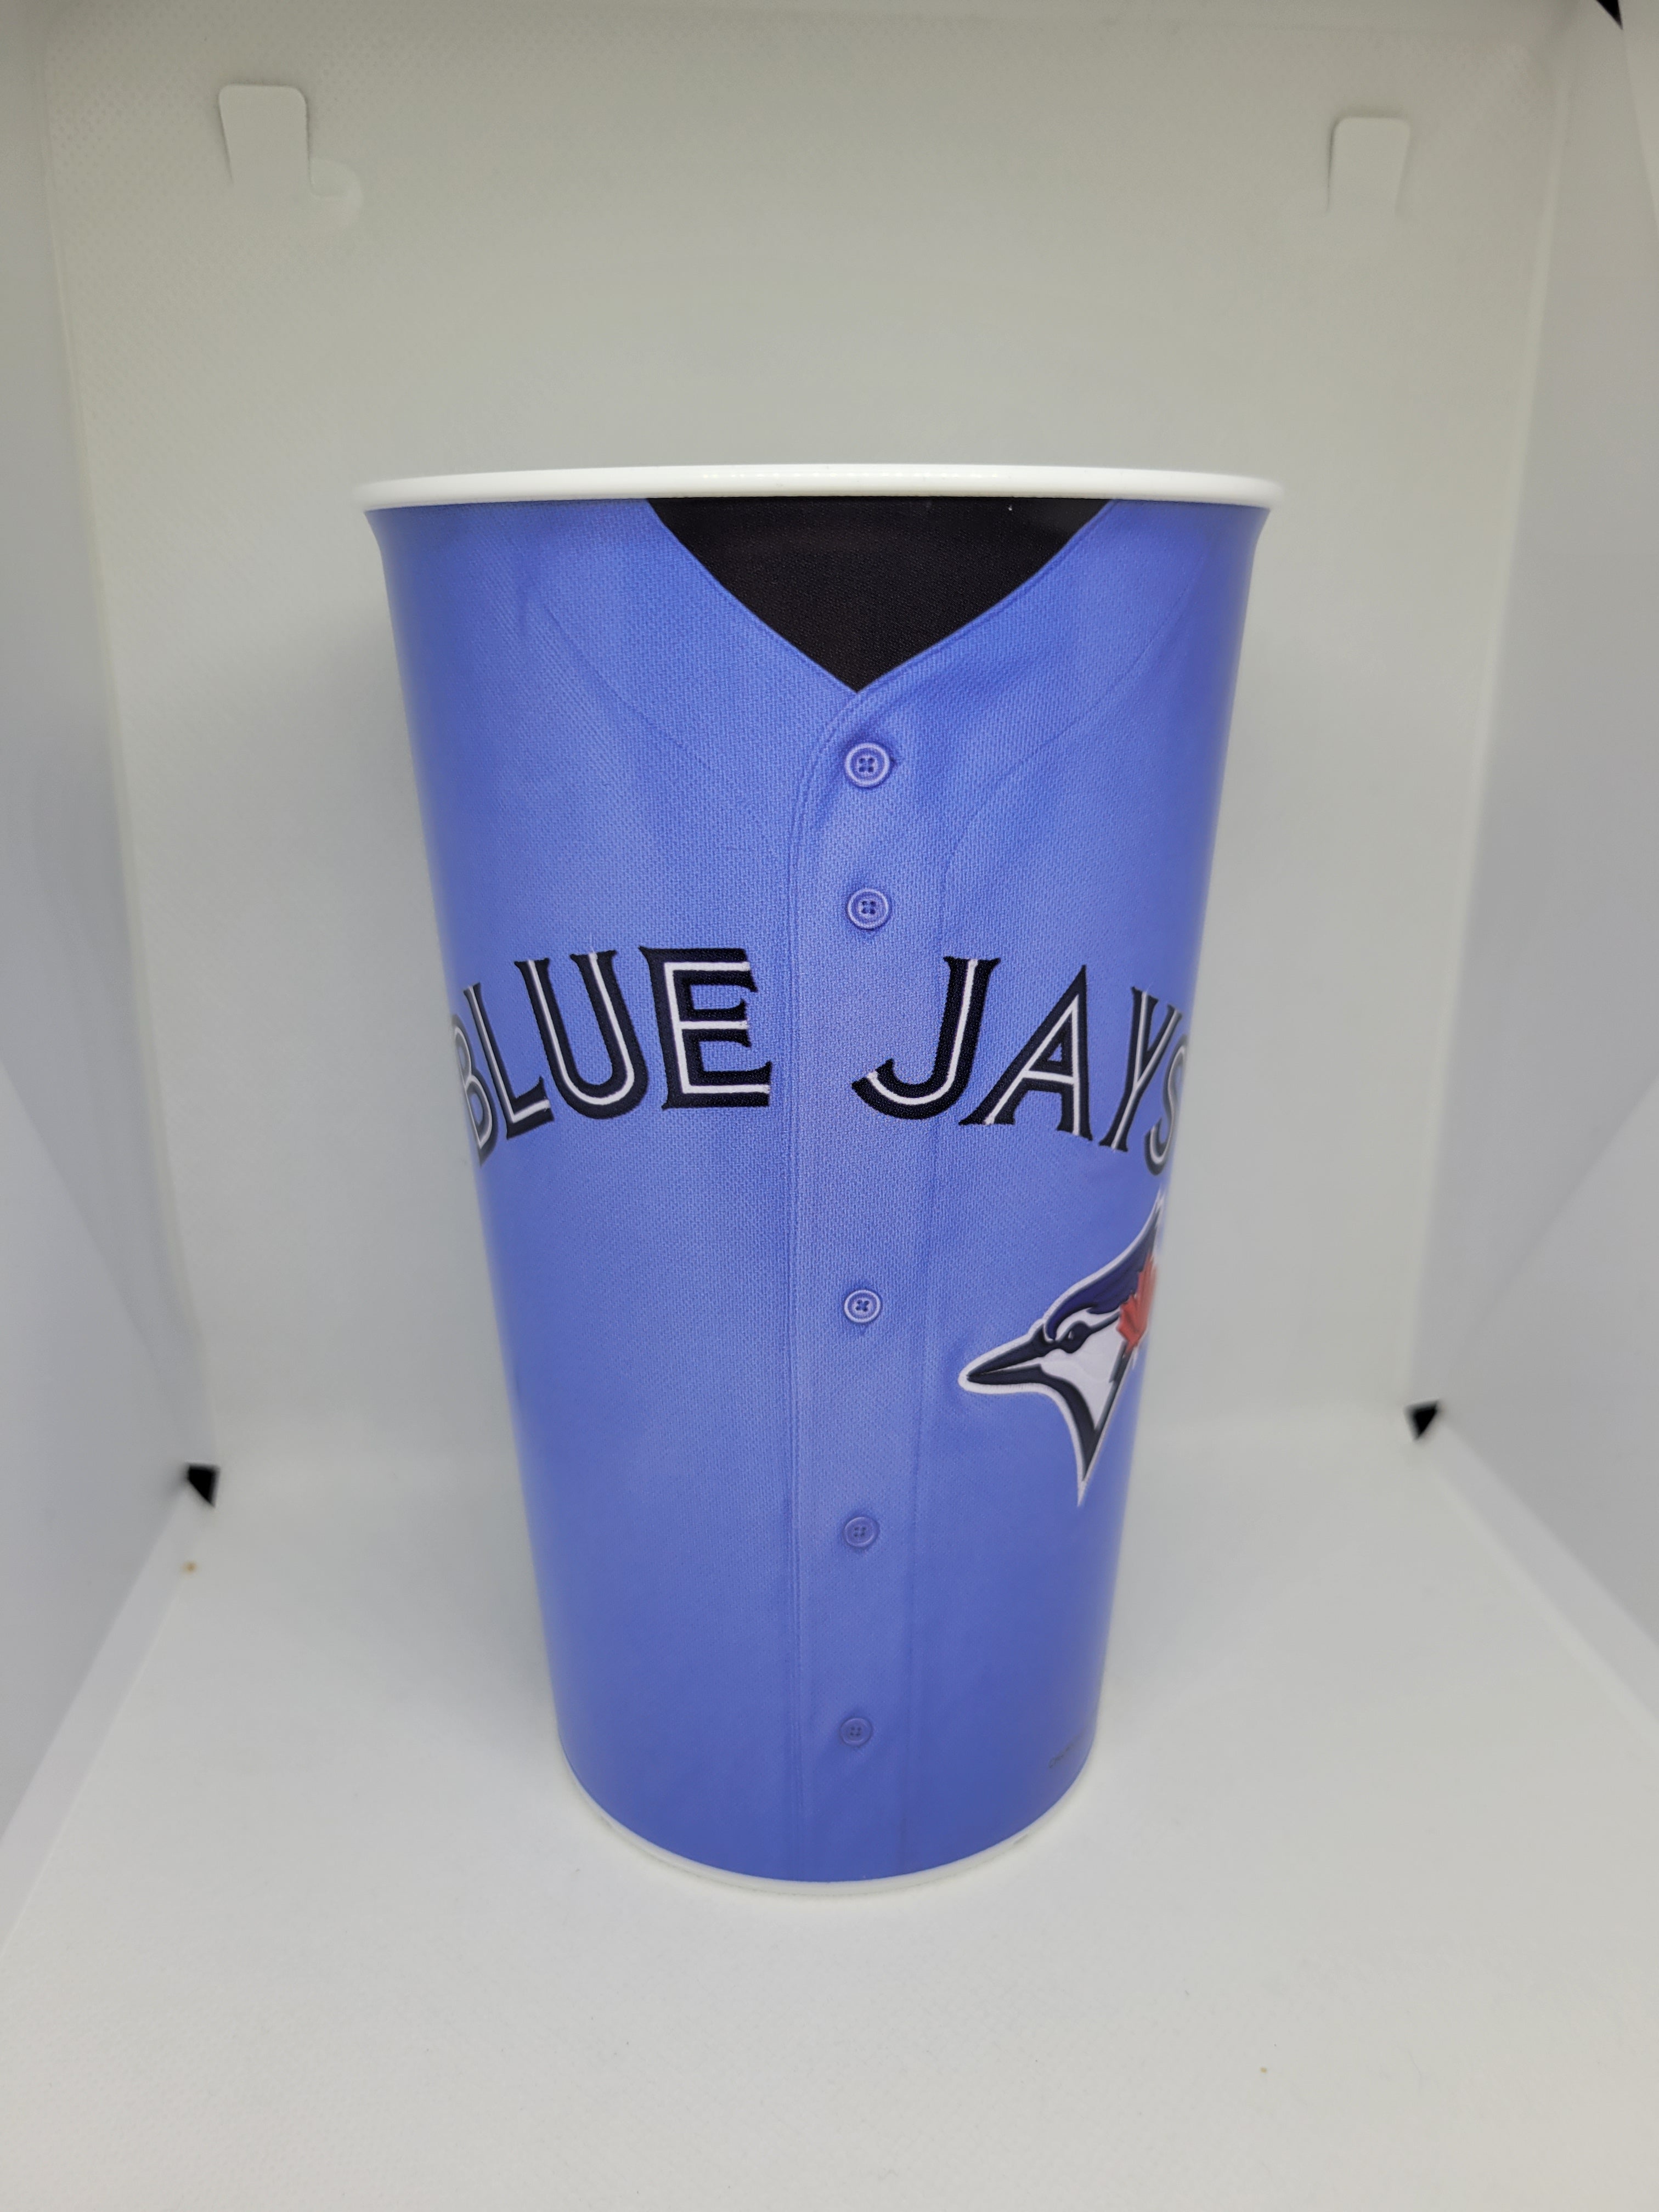 where can i buy blue jays jersey